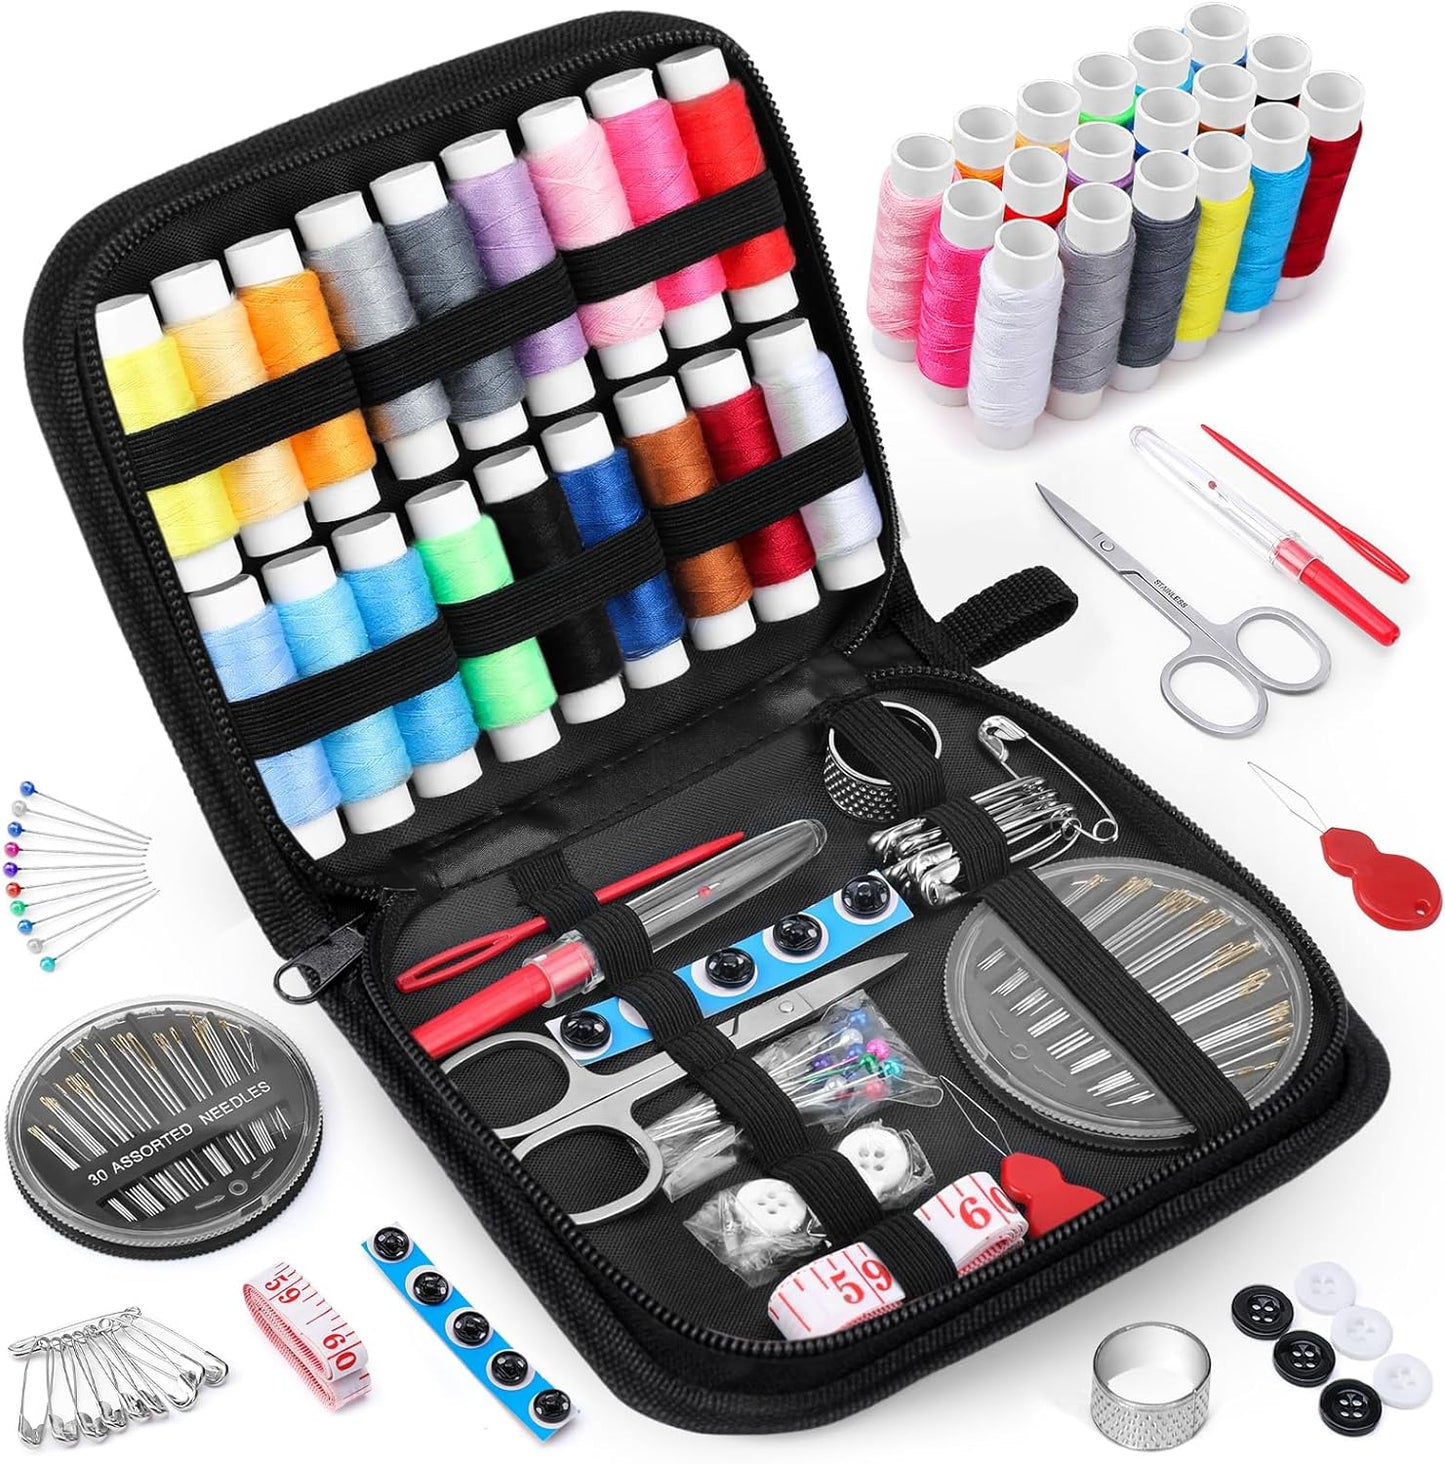 Sewing Kit Gifts for Grandma, Mom, Friend, Adults Beginner Kids Traveler, Portable Sewing Supplies Accessories with Case Contains Thread, , Scissors, Measure Tape, Thimble Etc(Black, M)